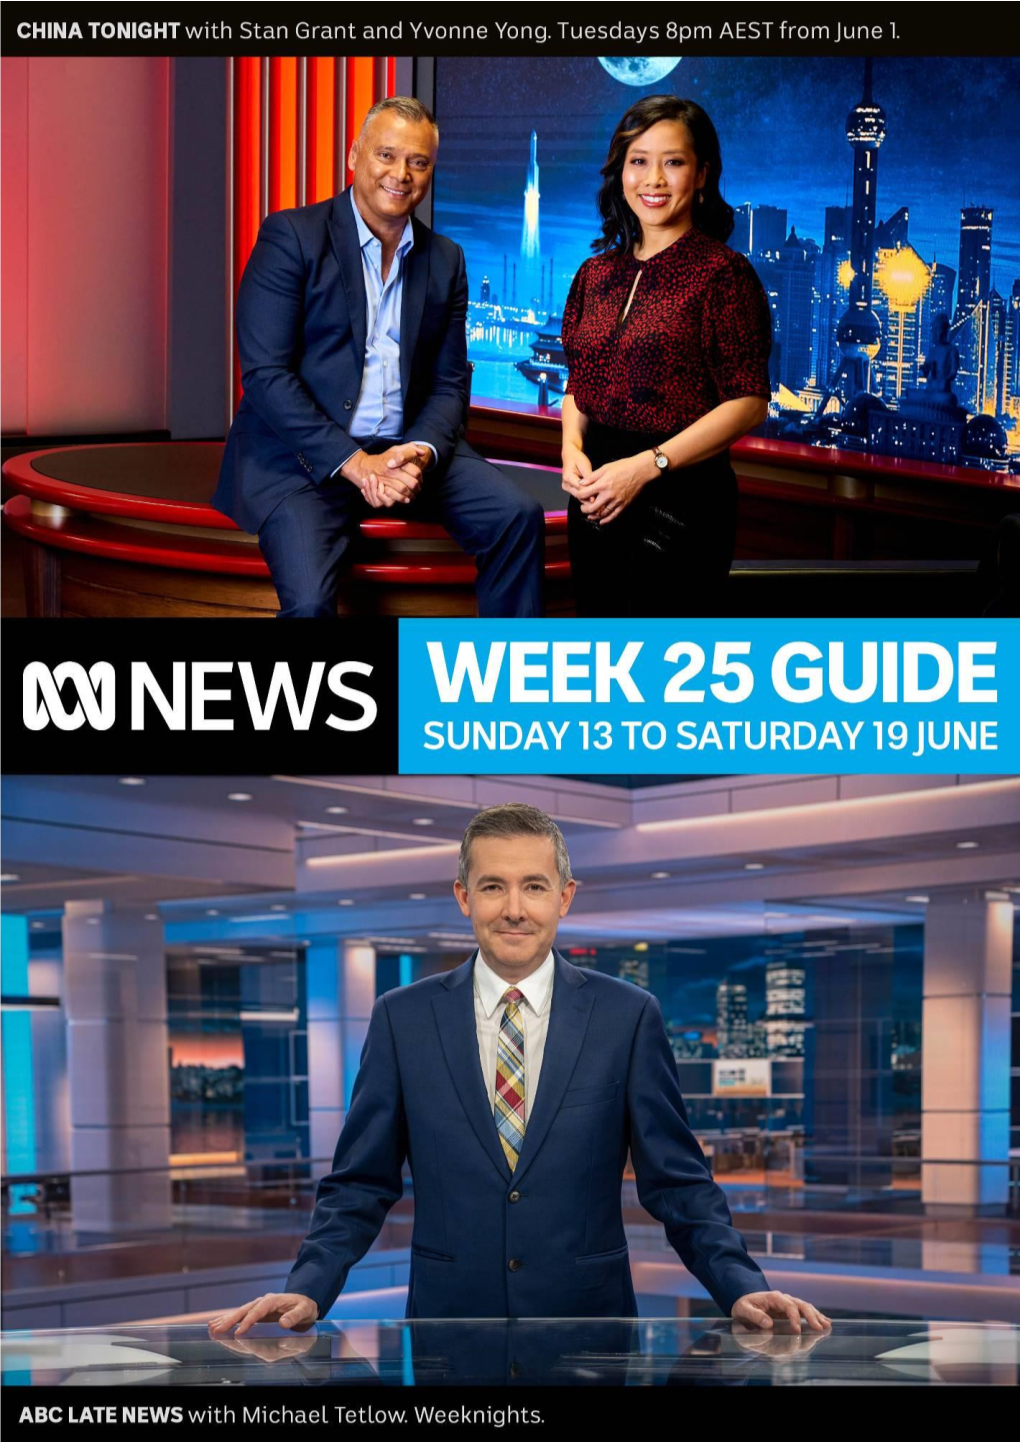 ABC NEWS Channel Airs Live Across Australia So Programs Air 30 Minutes Earlier in SA + NT, and 2 Hours Earlier in WA